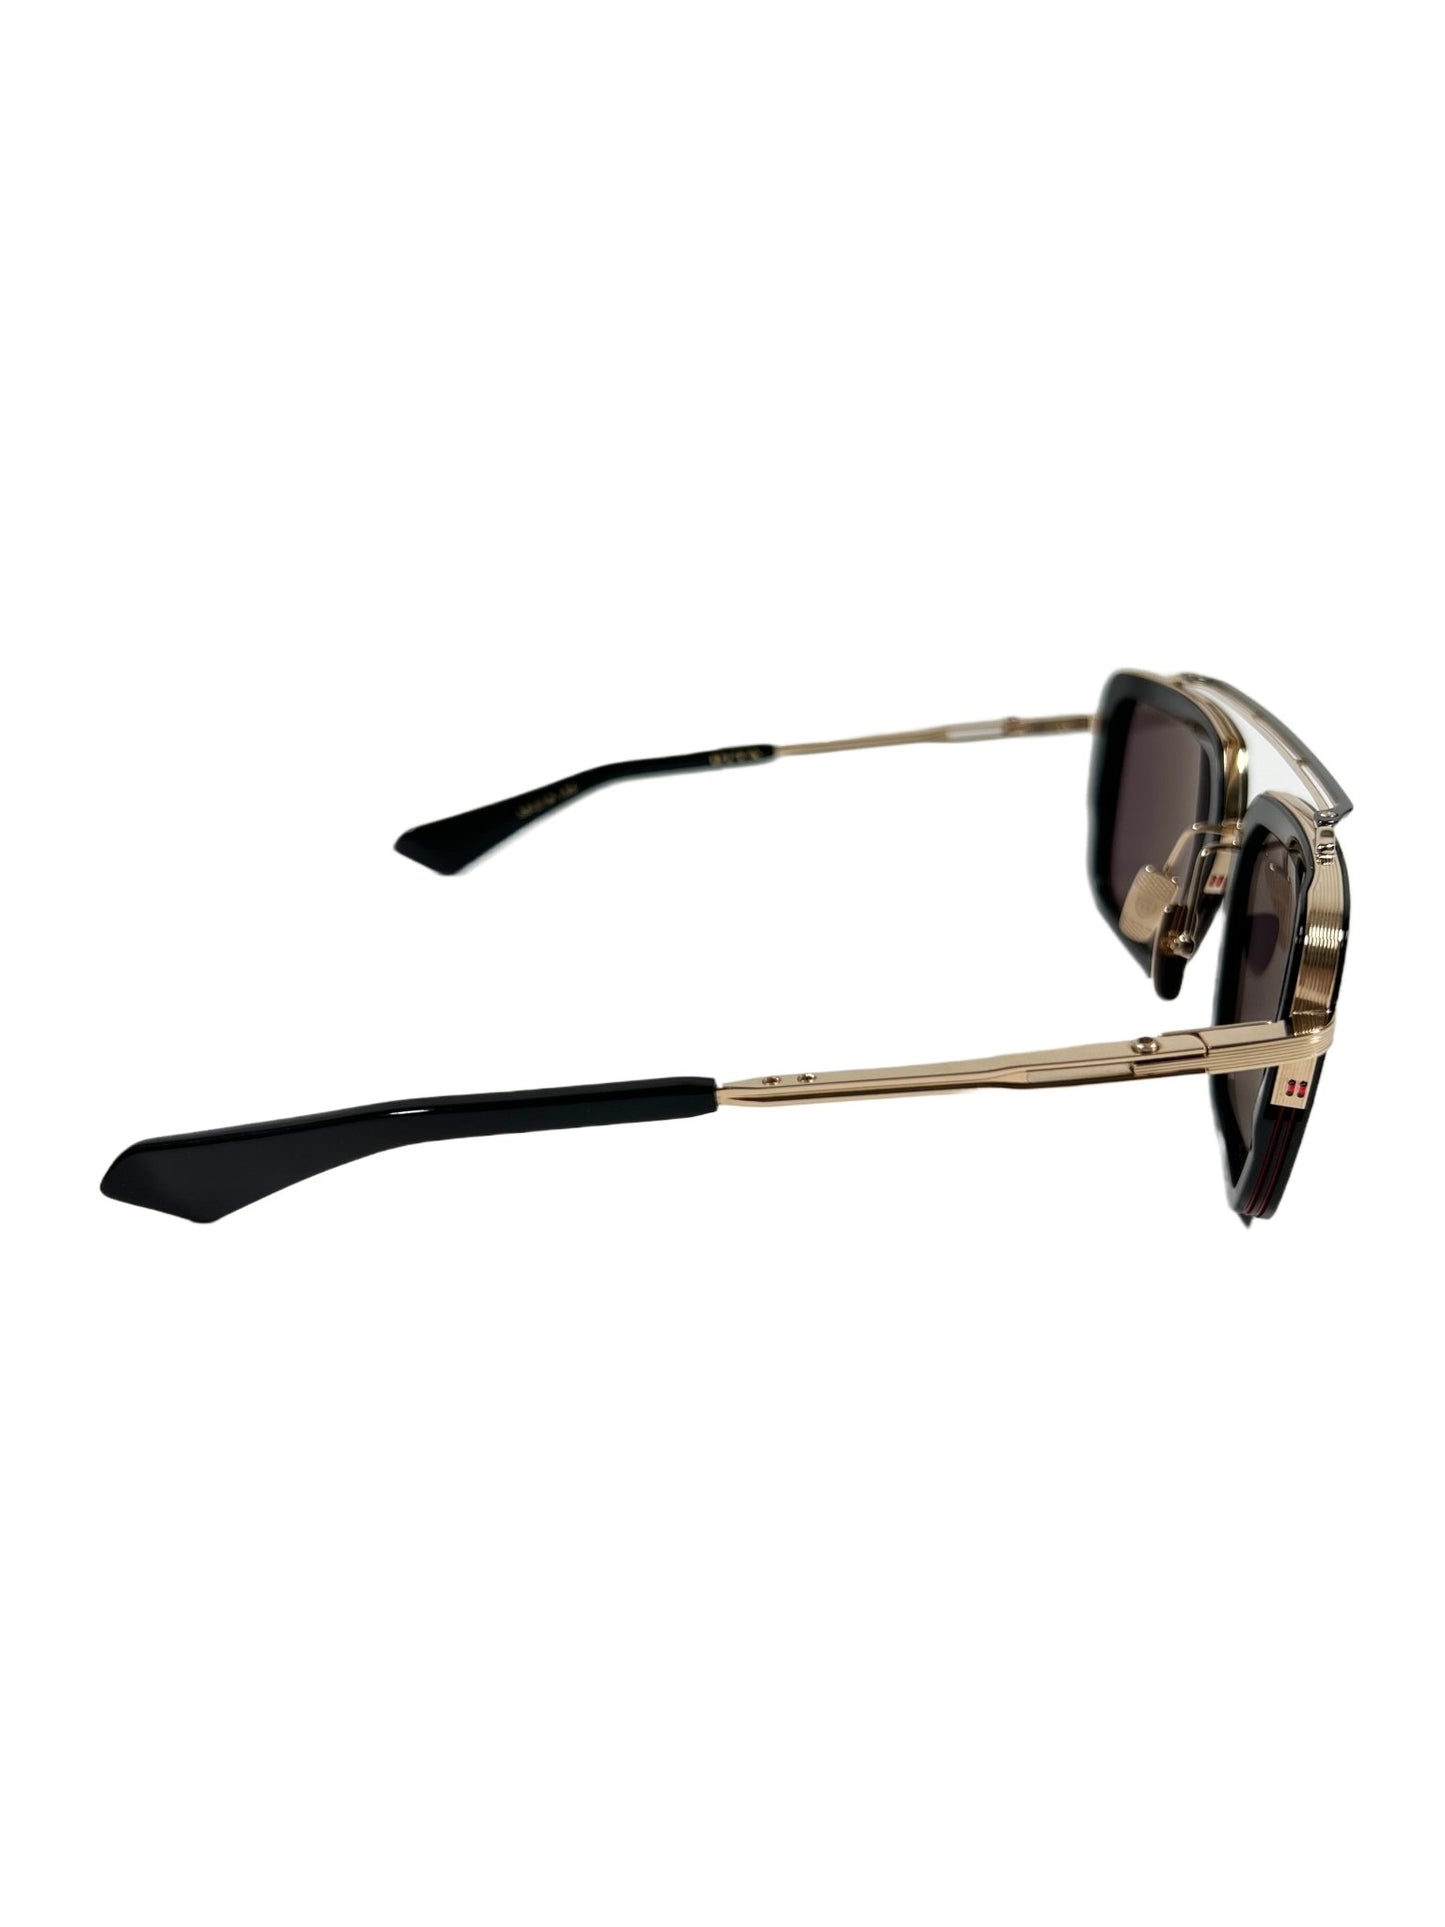 A pair of DITA MACH-SEVEN DTS135-56-01 sunglasses with a Rhodium frame and black lenses.